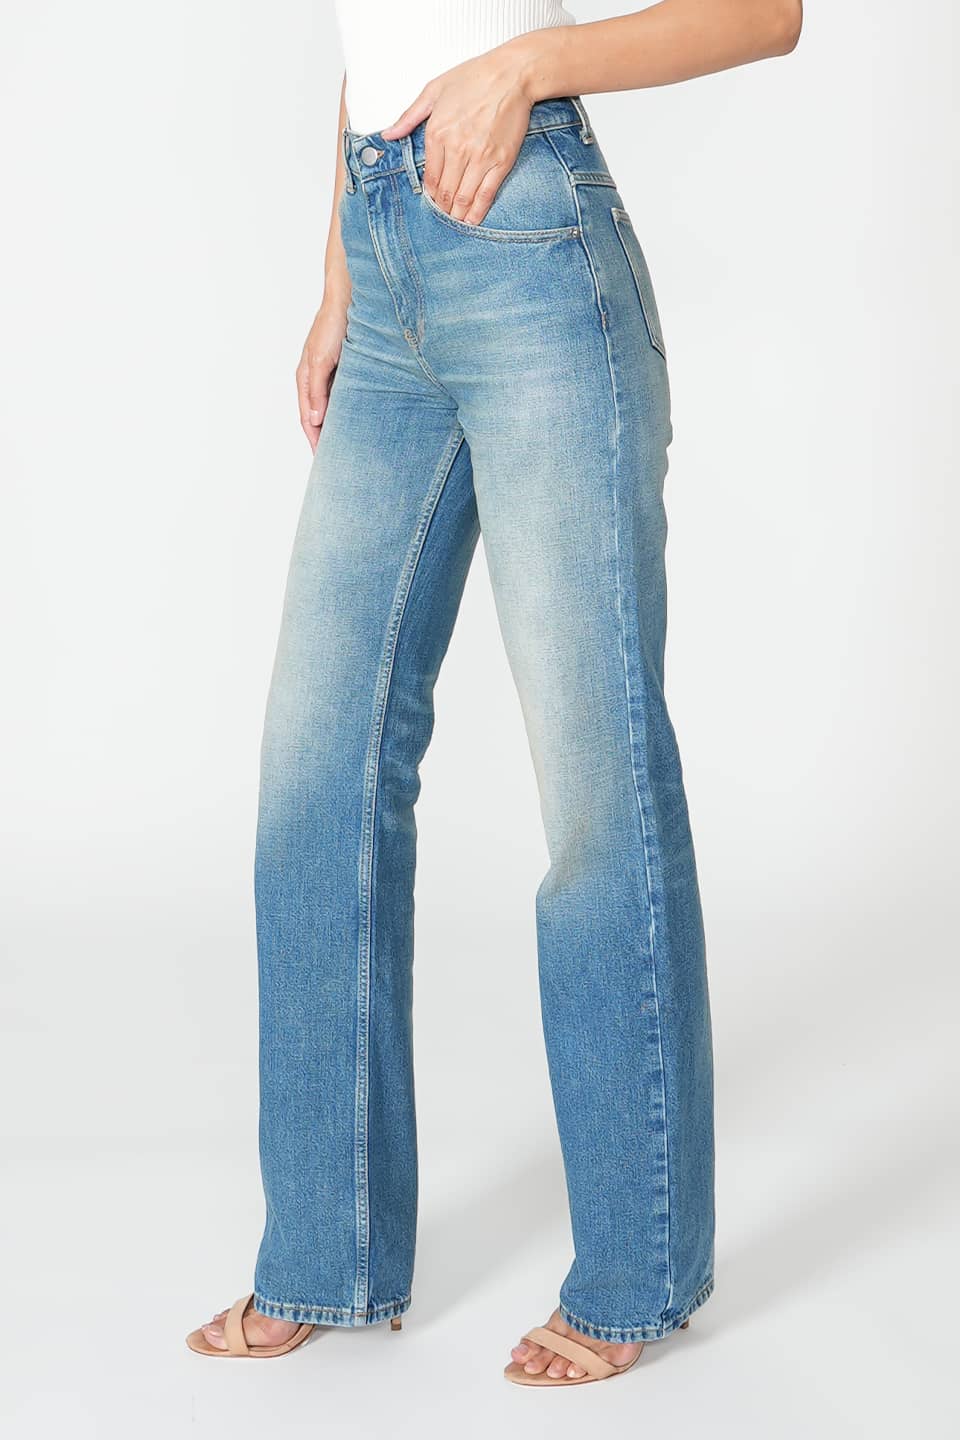 Designer Indigo Jeans, shop online with free delivery in UAE. Product gallery 4